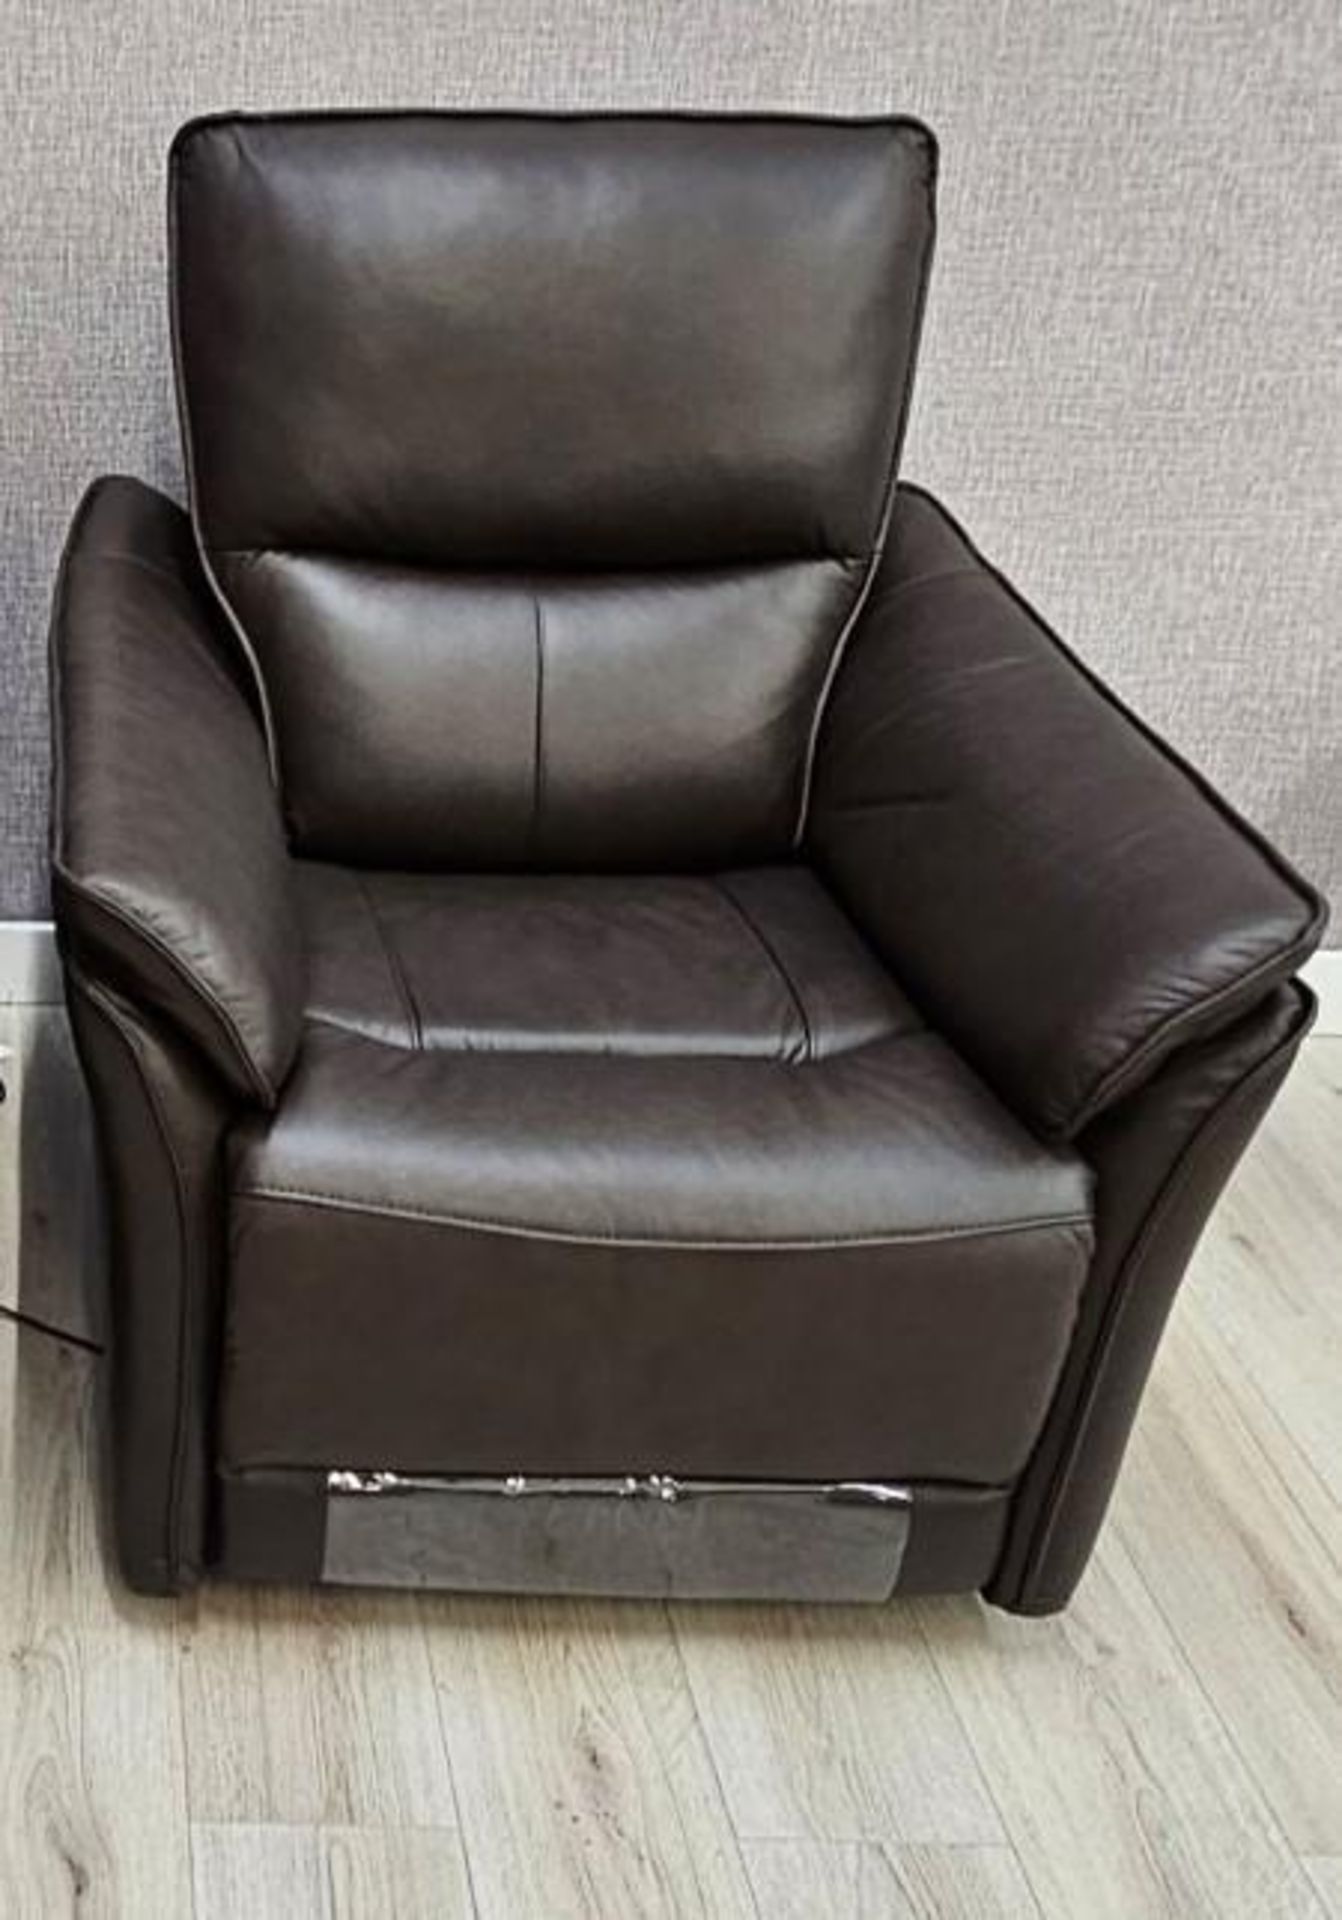 Brand new & boxed ATS Turin Luxury Brown Leather 3 + 1 + 1 Manual Recliners. - Bild 3 aus 3